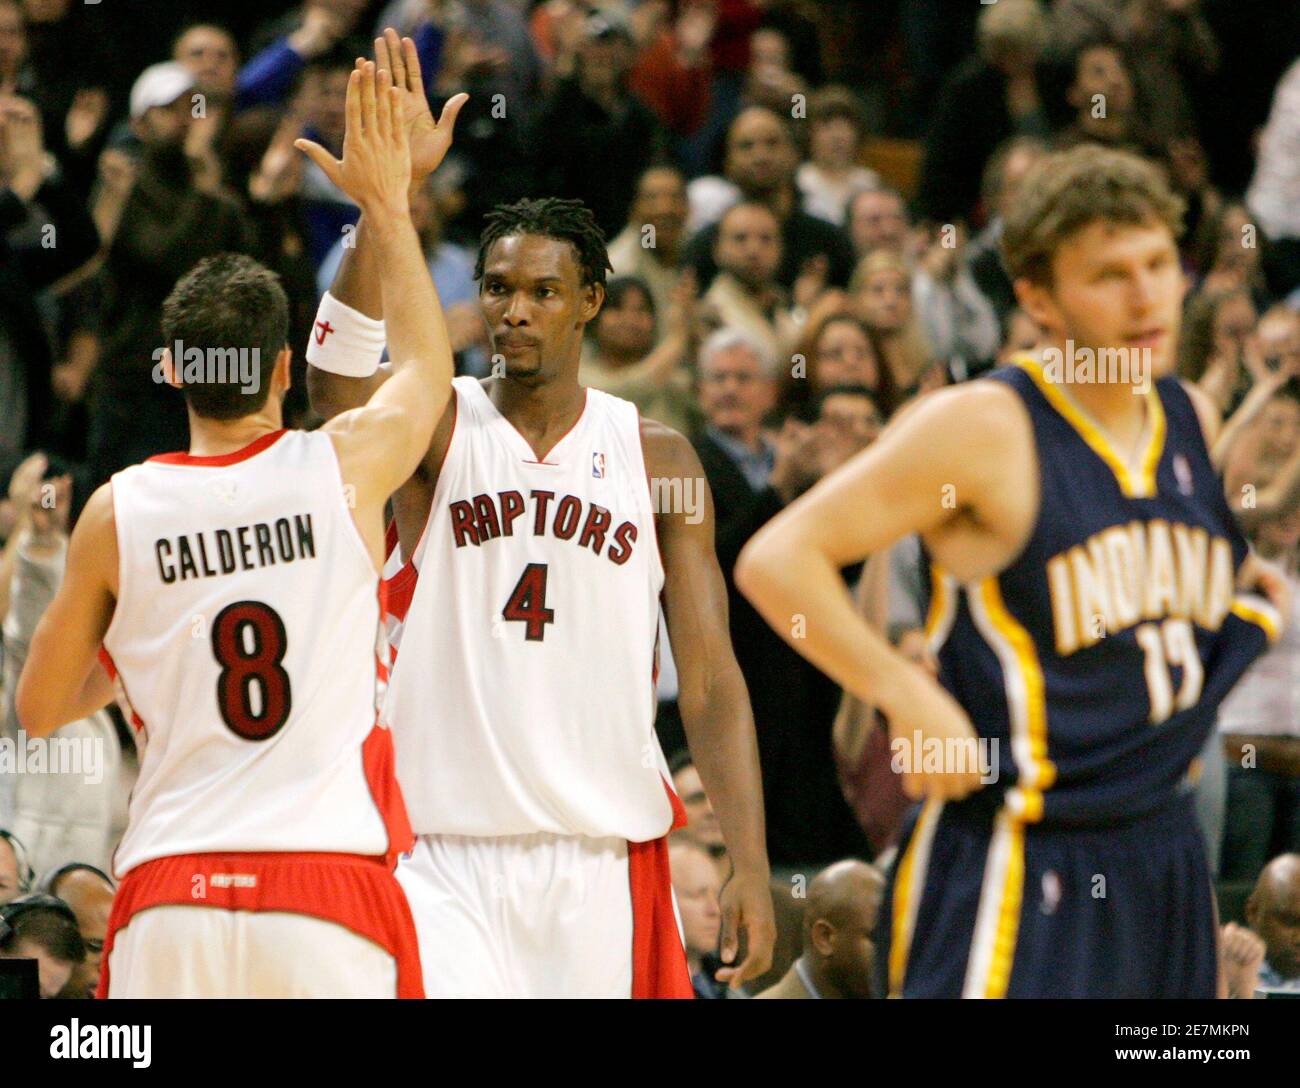 Toronto Raptors' Jose Calderon (L) and Chris Bosh (C) celebrate their win behind Indiana Pacers' Travis Diener during the fourth quarter of their NBA basketball game in Toronto November 16, 2007.     REUTERS/ Mike Cassese   (CANADA) Stock Photo